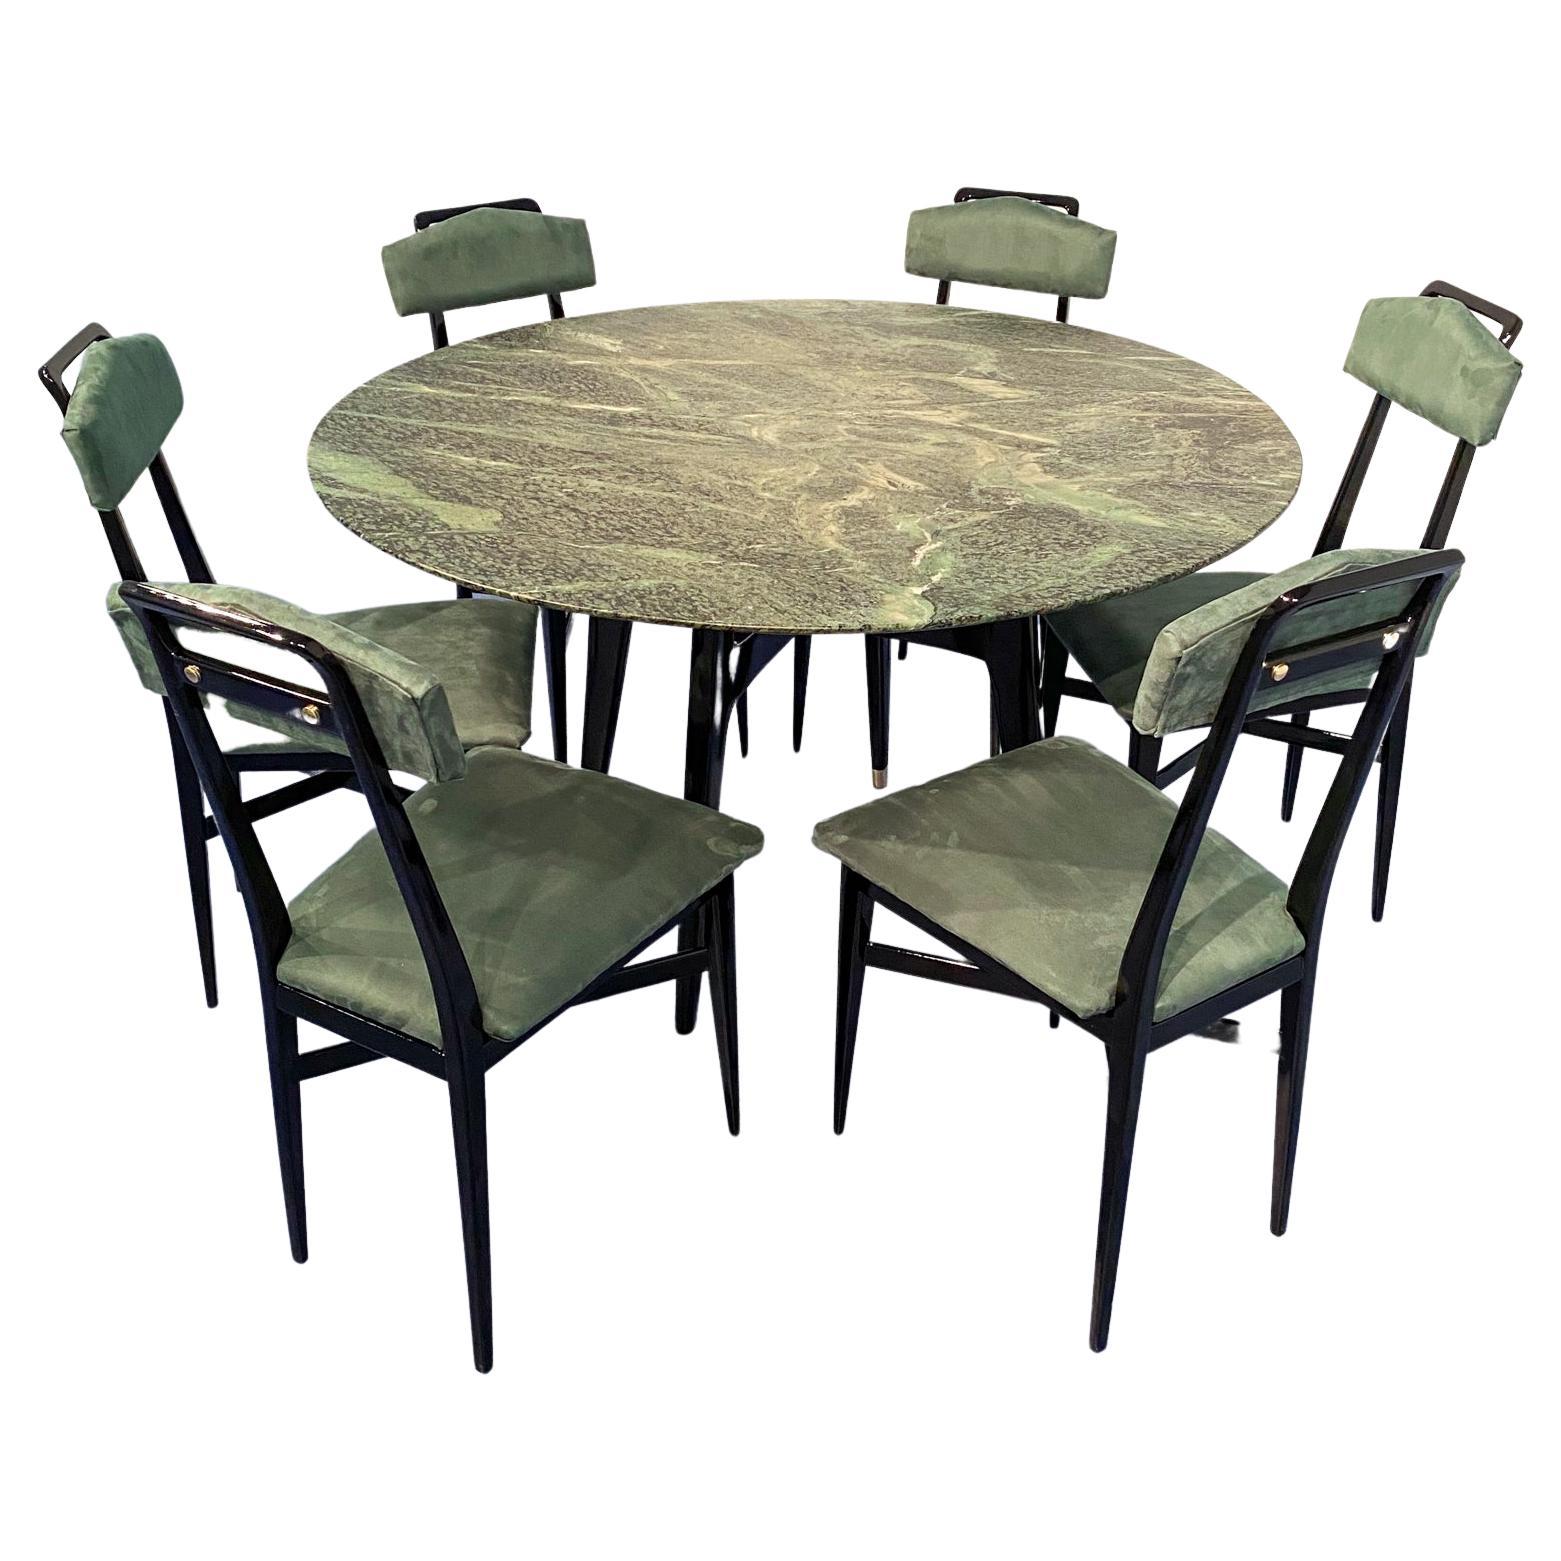 Beautiful dining set composed of dining table and dining chairs.
This stylish mid-century round marble dining table is a stunning example of 1950s Italian design.
The top is crafted from precious green marble from the Alps.
The black lacquered